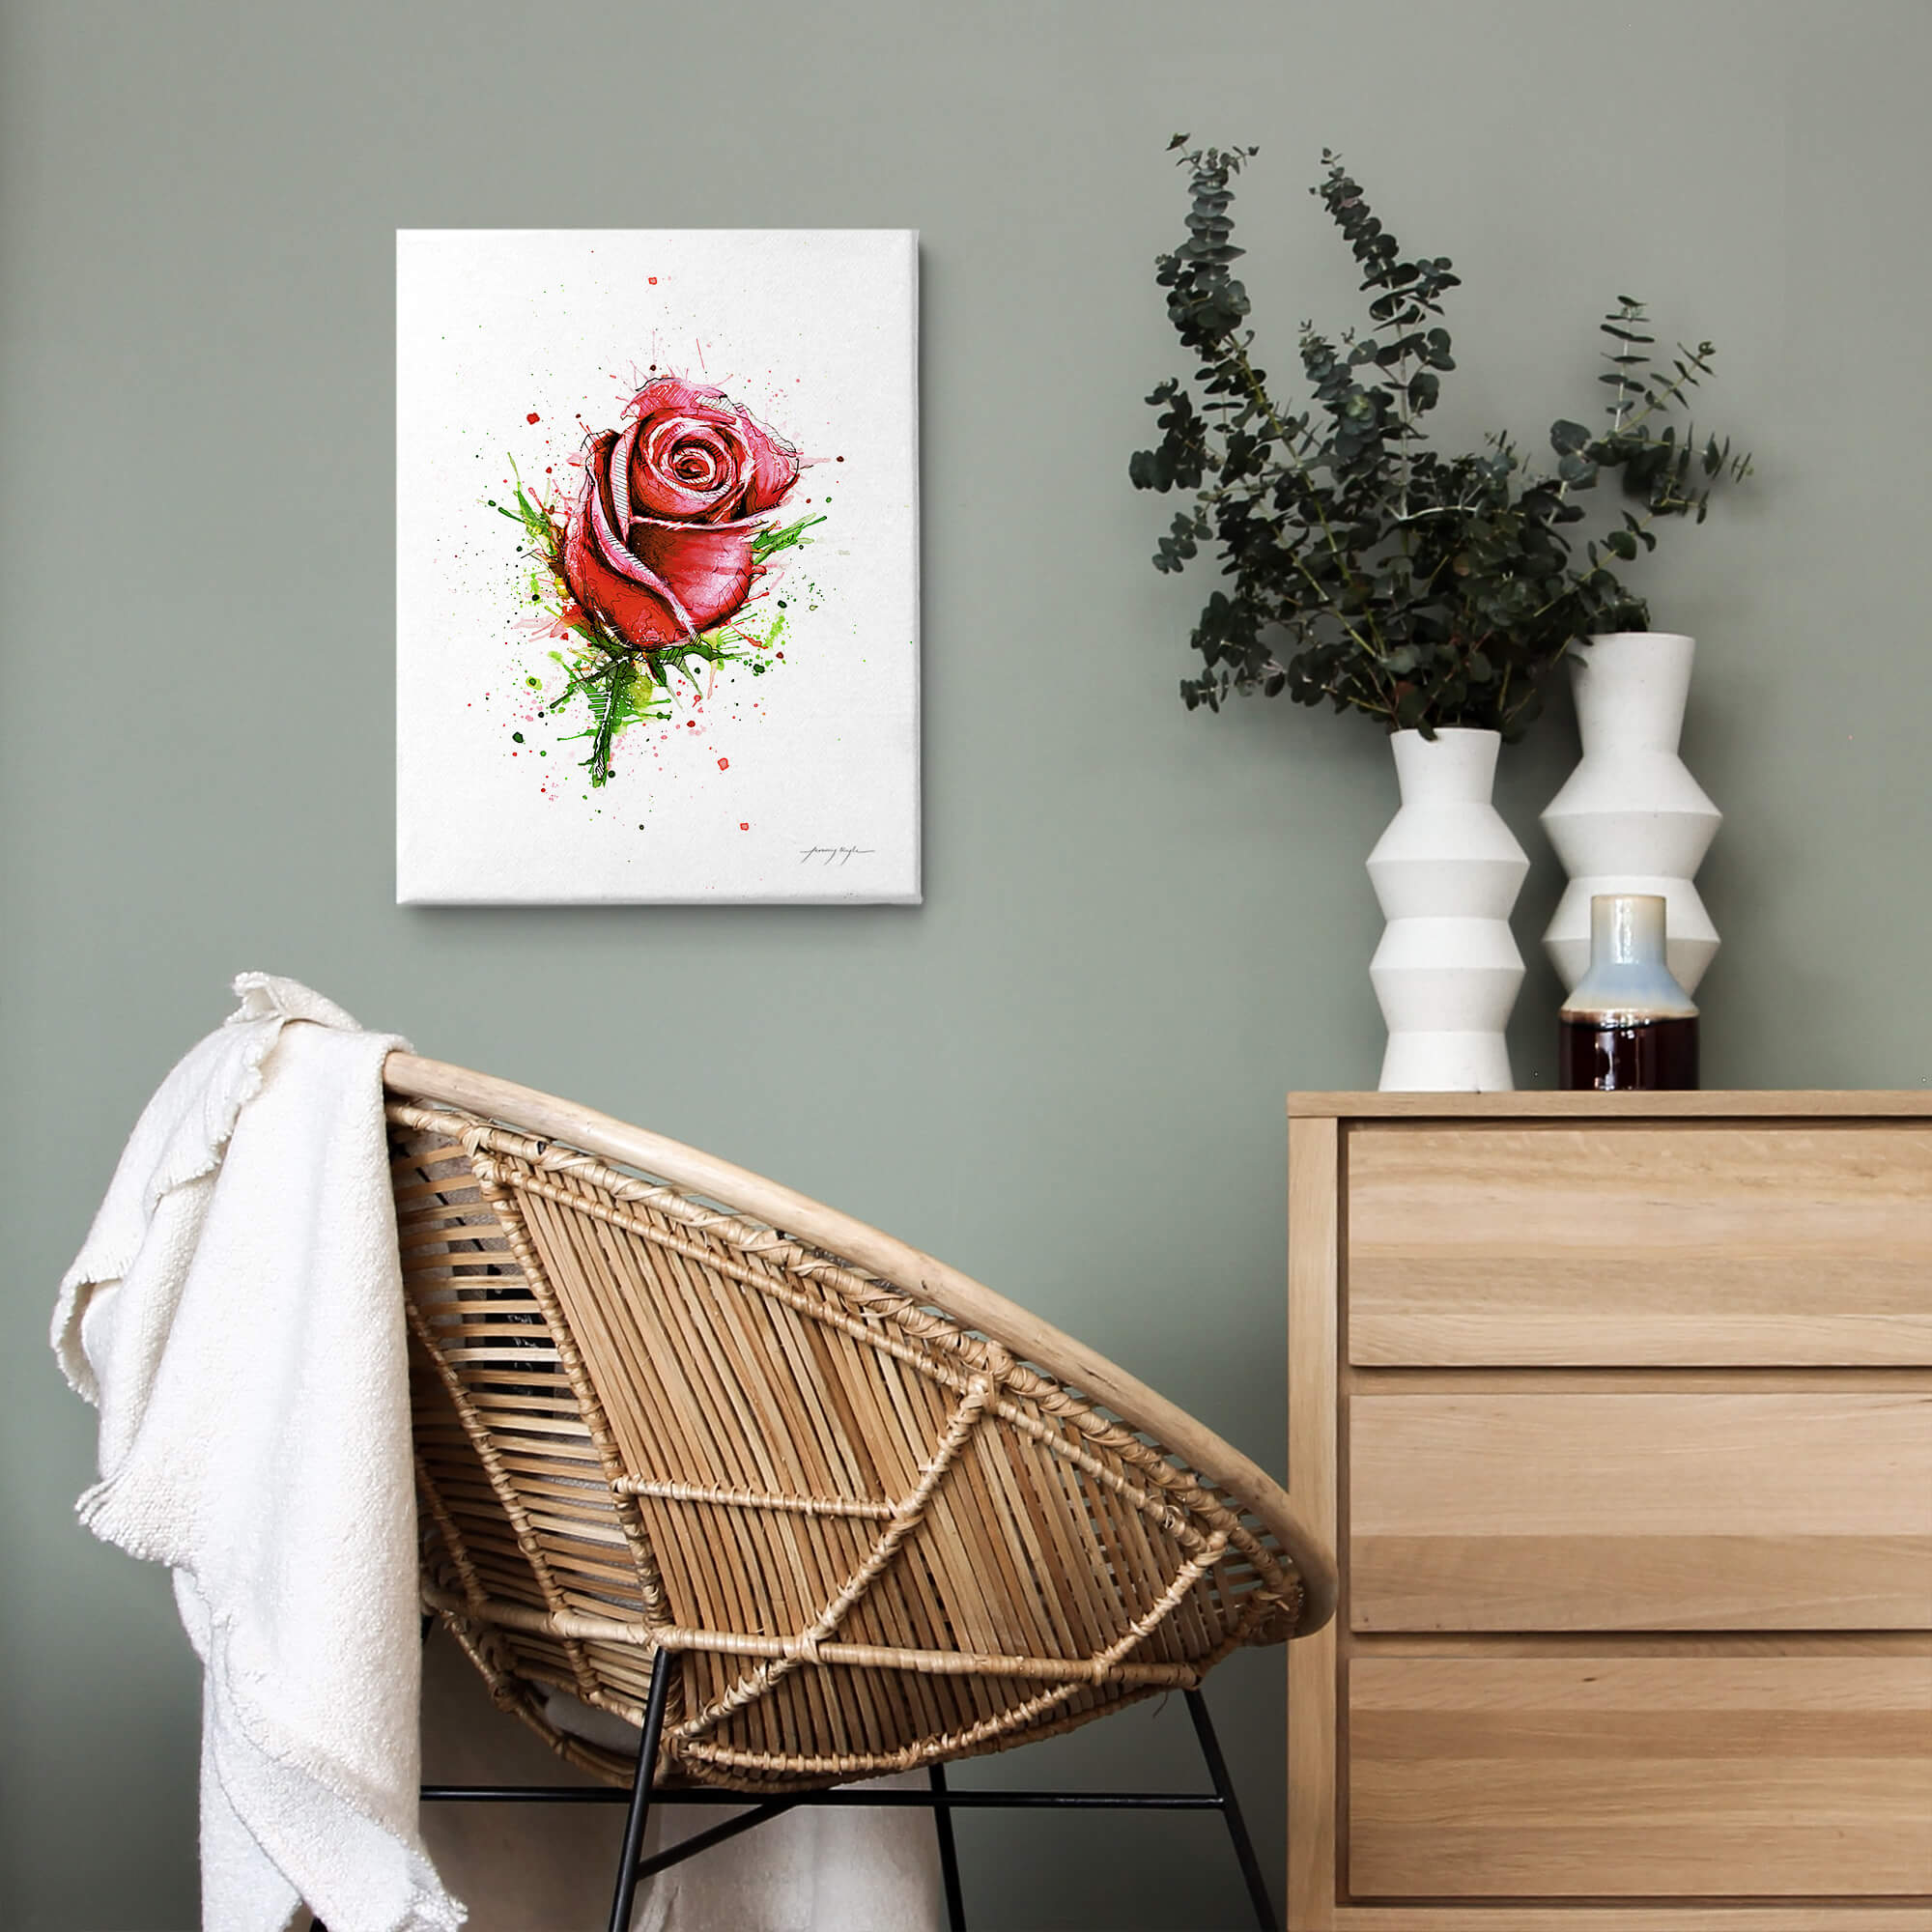 Image of a rose canvas print hanging on a wall